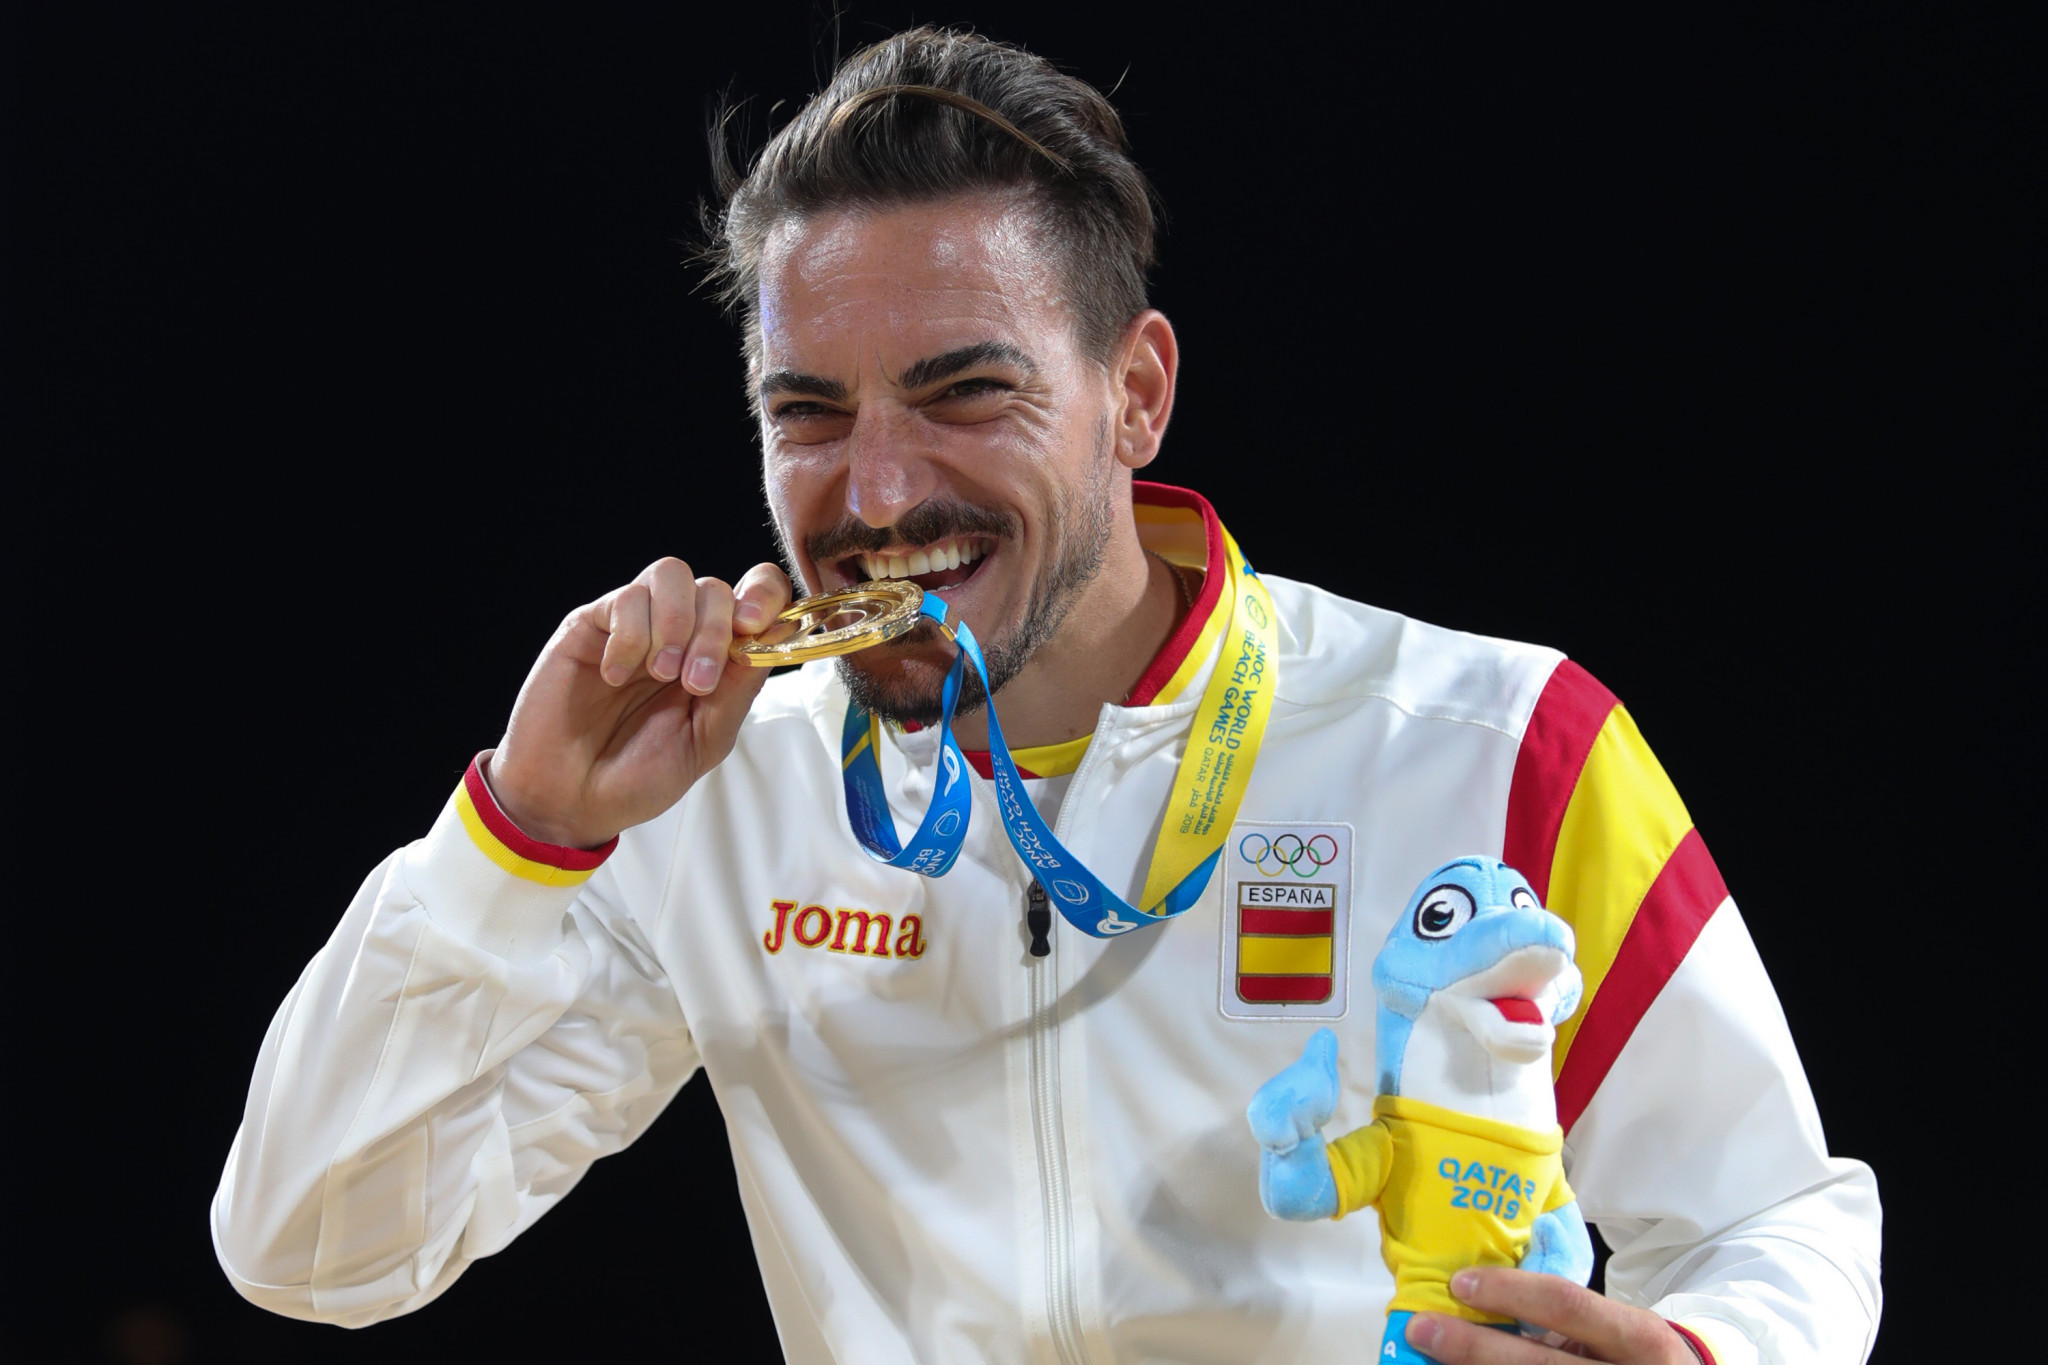 Damien Quintero celebrates with his ANOC World Beach Games gold medal after making it an historic Spanish double in karate kata ©ANOC World Beach Games